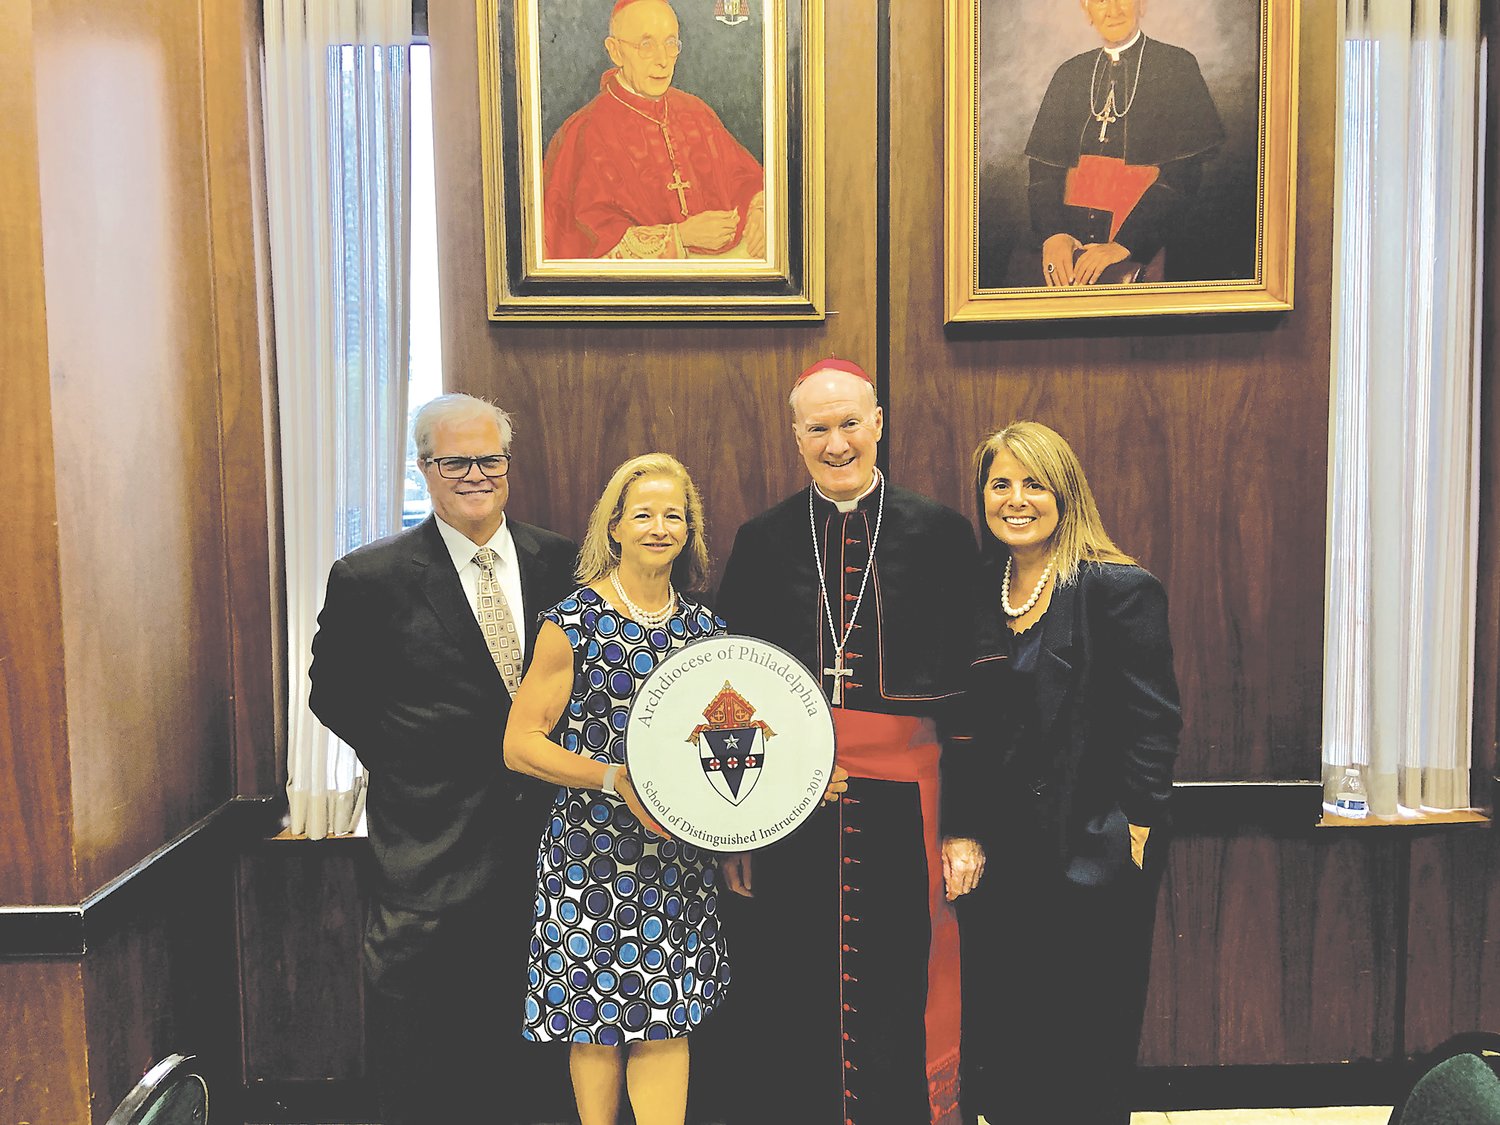 From left are: Dr. Andrew McLaughlin, secretary for elementary education; Dawn Parker, principal of Our Lady of Mount Carmel School; Auxiliary Bishop Michael Fitzgerald and Michelle Stetler, director of institutional advancement of Our Lady of Mount Carmel.